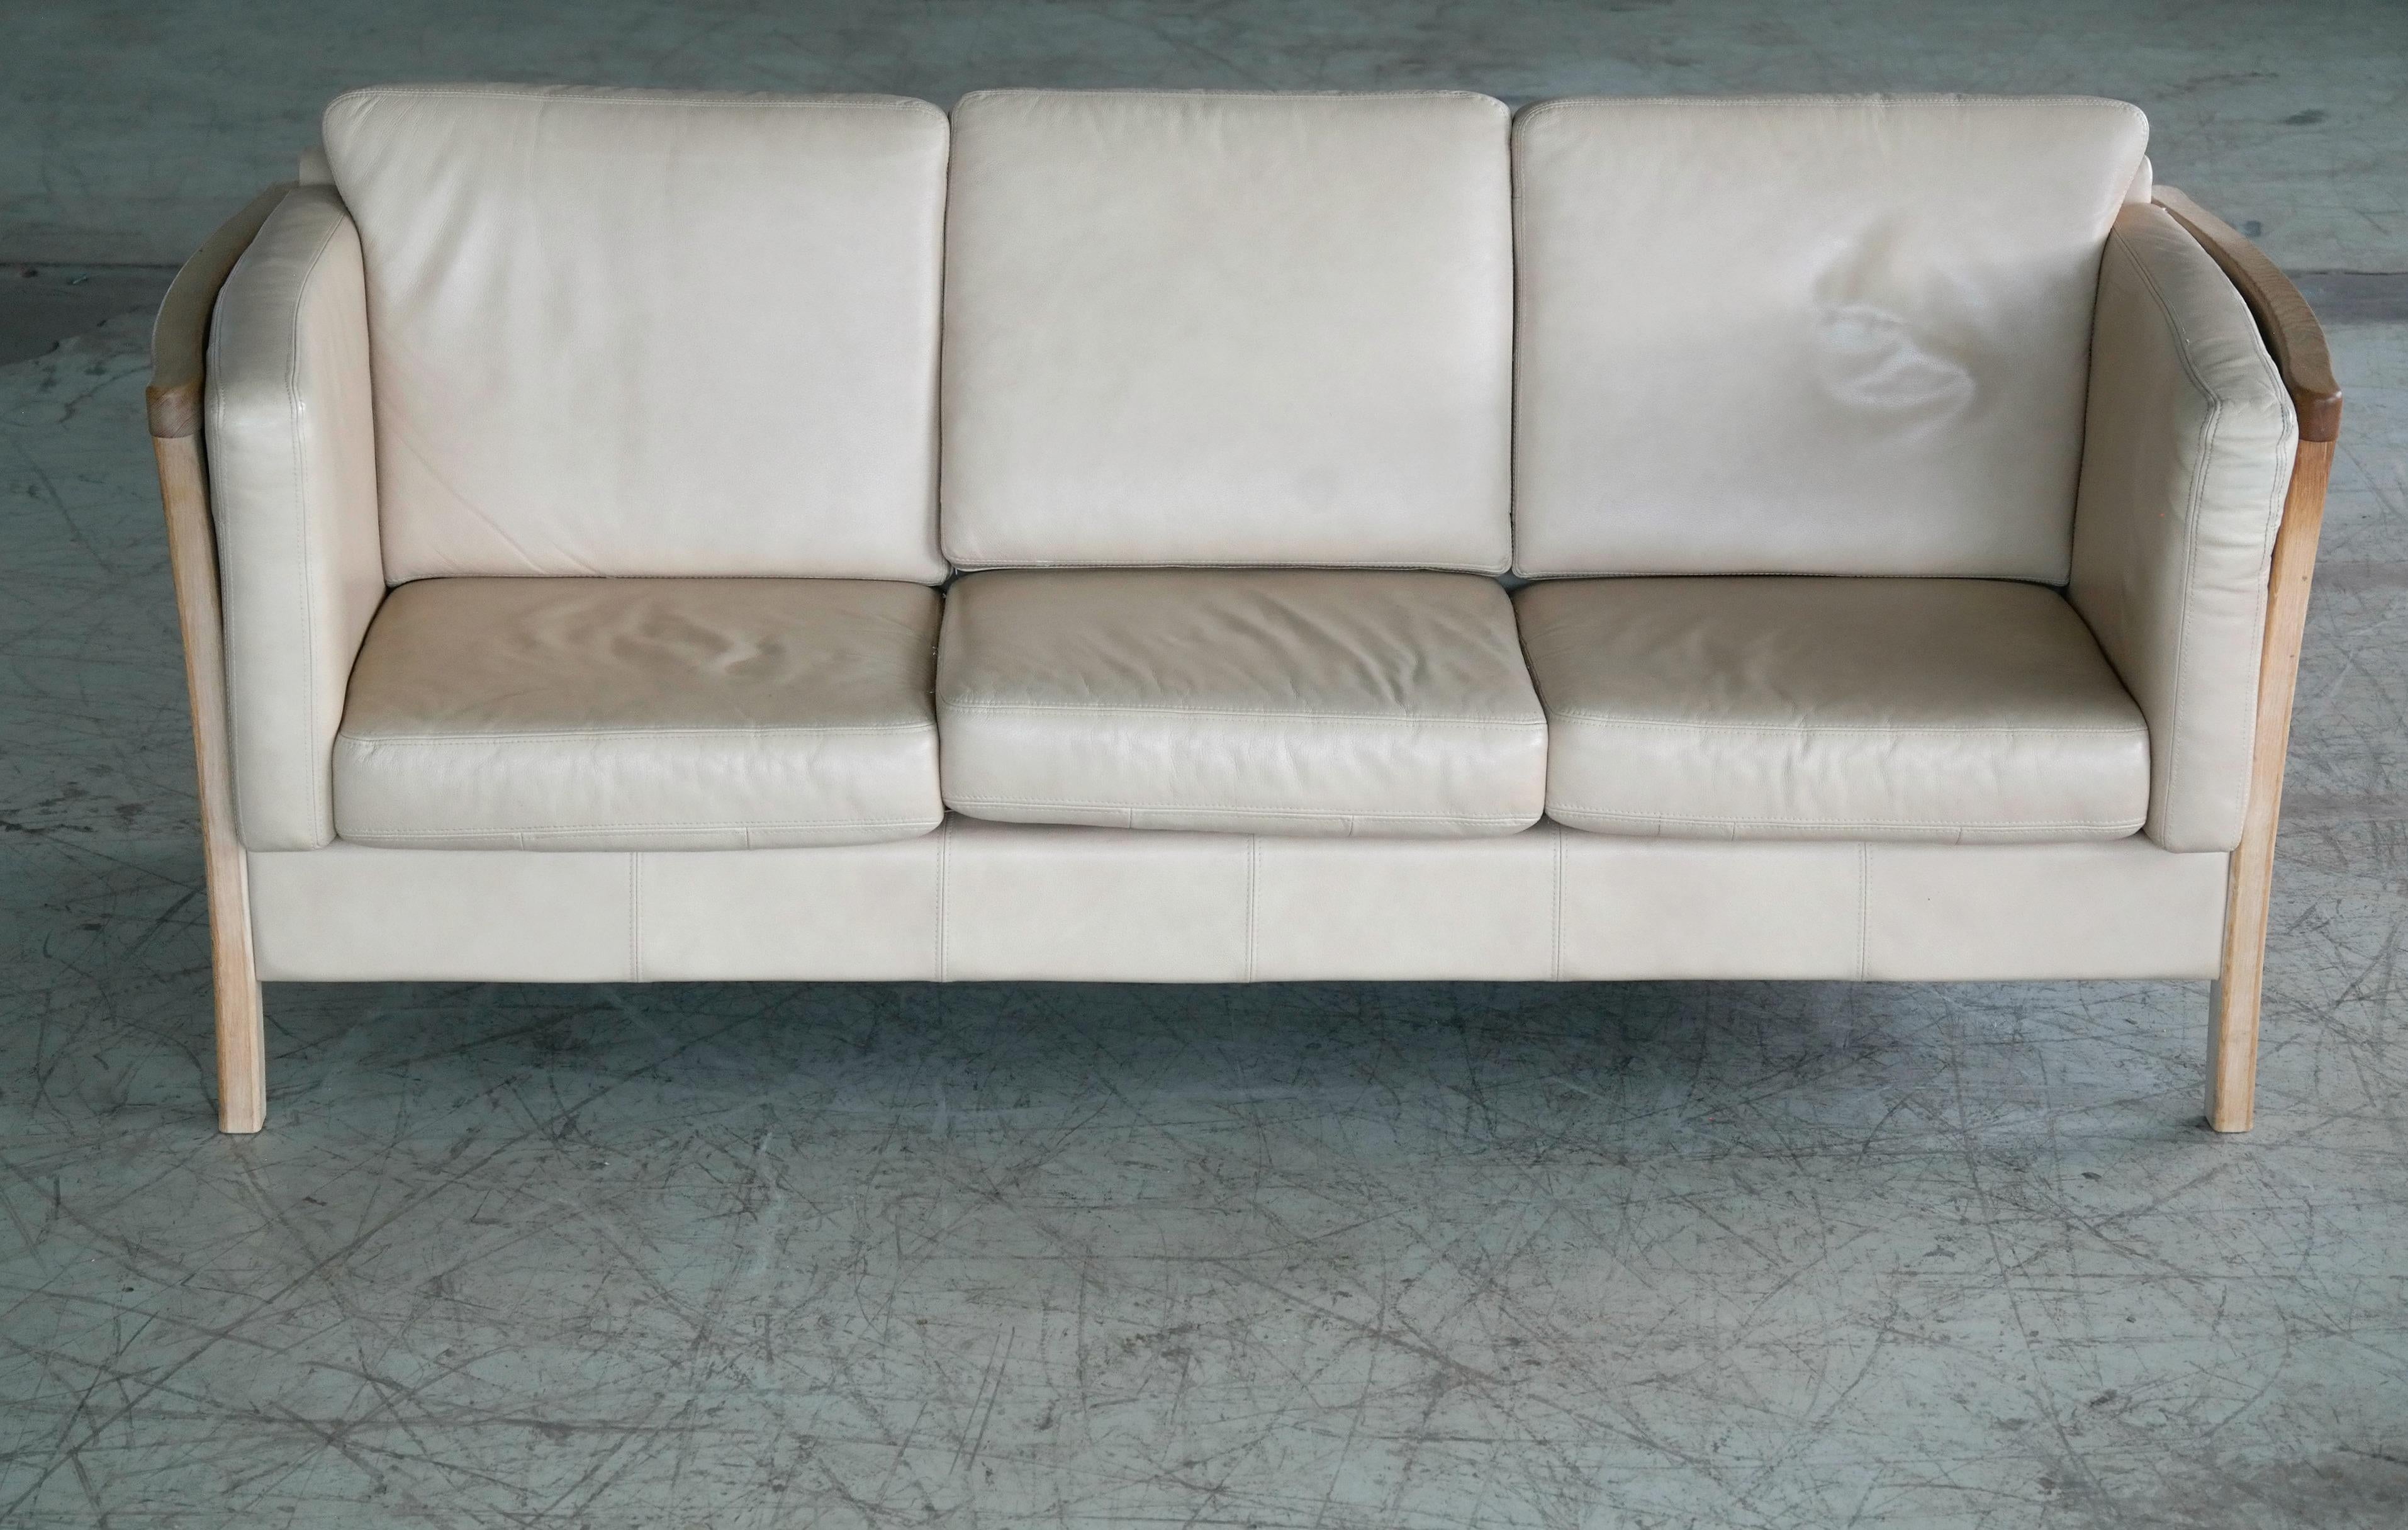 Great Danish modern sofa in the tradition of Borge Mogensen's famous spoke back sofa. It is an enduring design that the Danes have appreciated for many decades as they love the mix of leather and blond wood. The sofa is un-marked and we are not